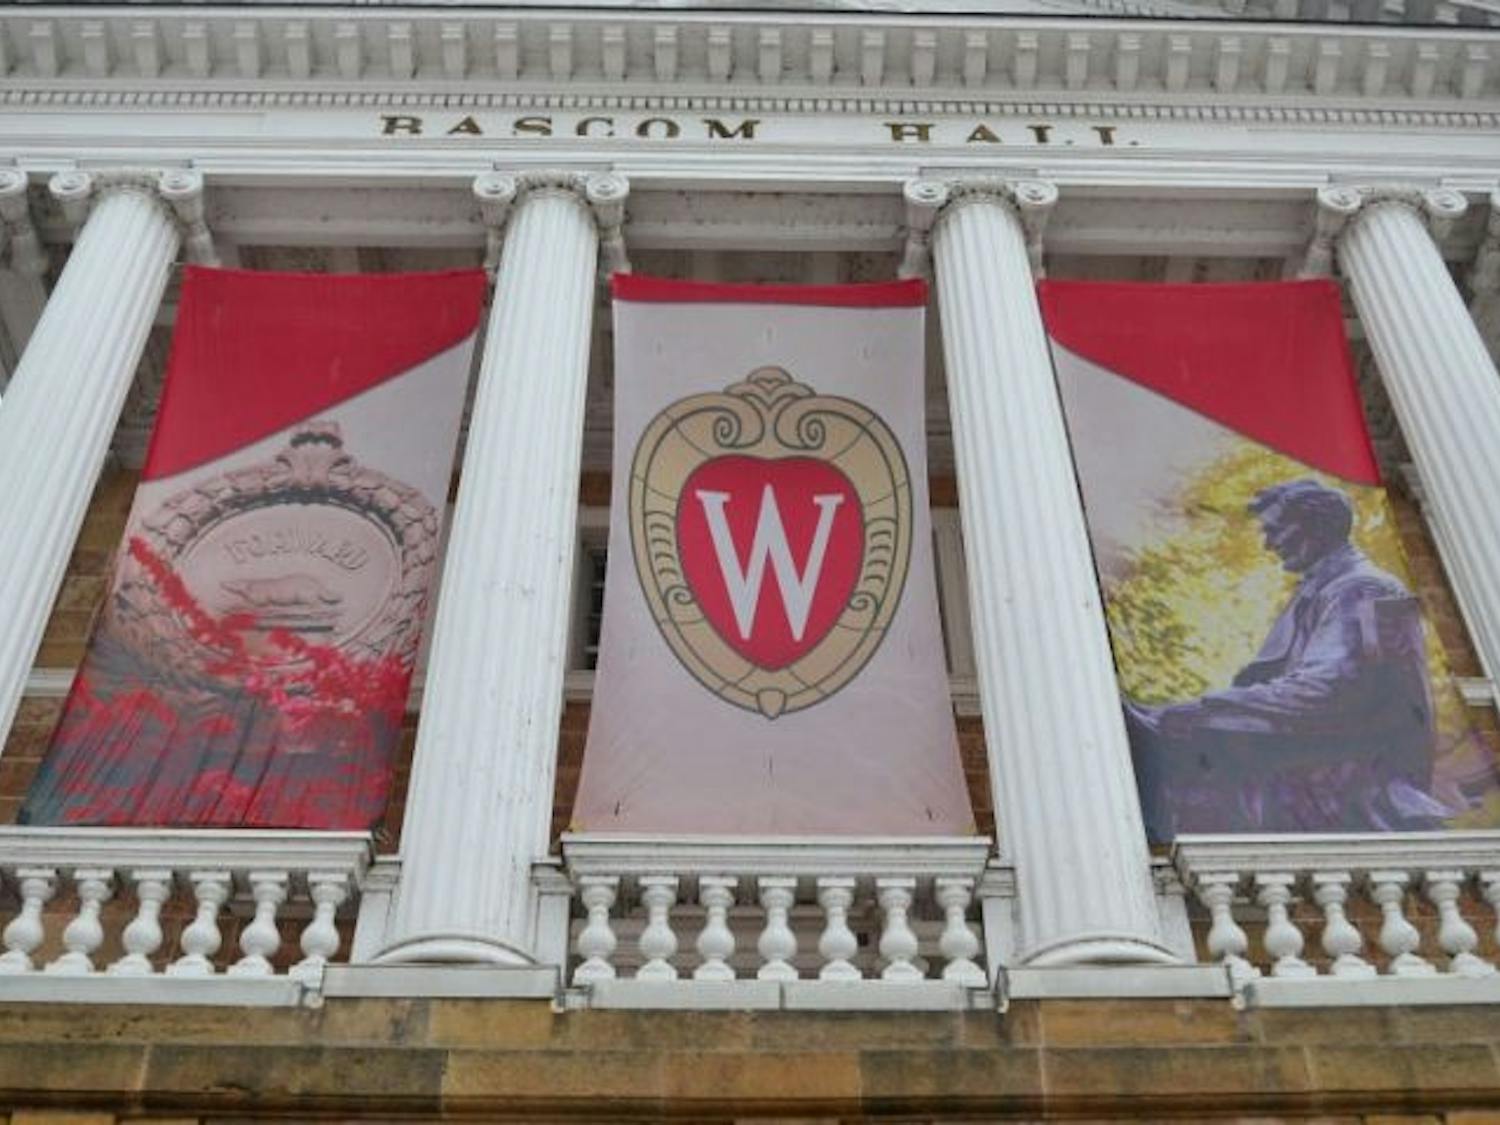 The practice of considering criminal records is quite common among UW-Madison’s peer institutions, with 12 out of the 13 other Big Ten schools receiving&nbsp;information about applicants’ criminal histories during the admissions process.